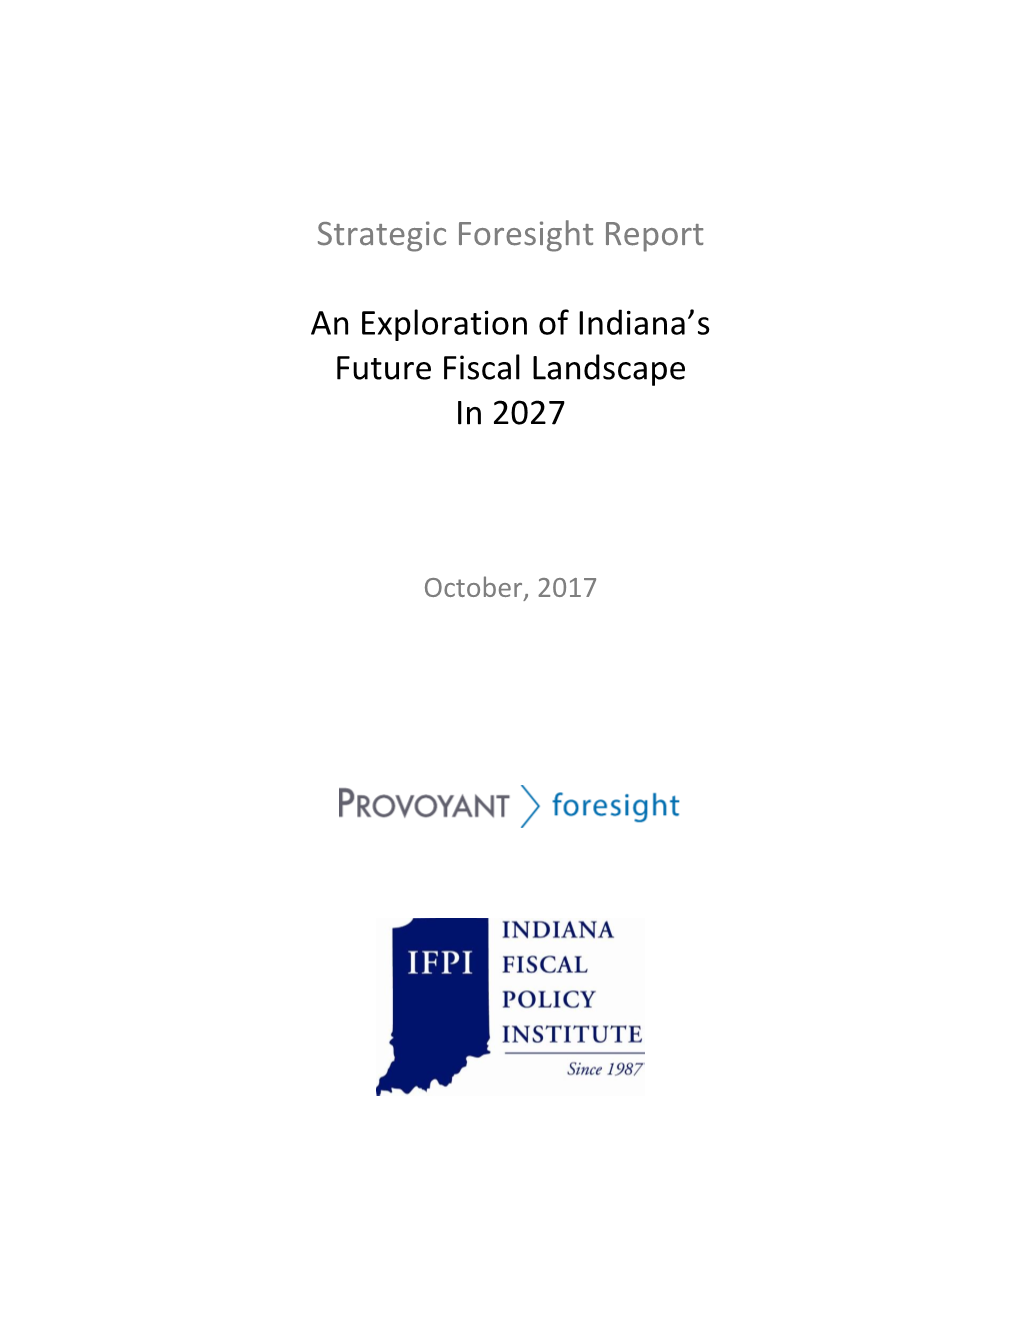 Strategic Foresight Report an Exploration of Indiana's Future Fiscal Landscape in 2027